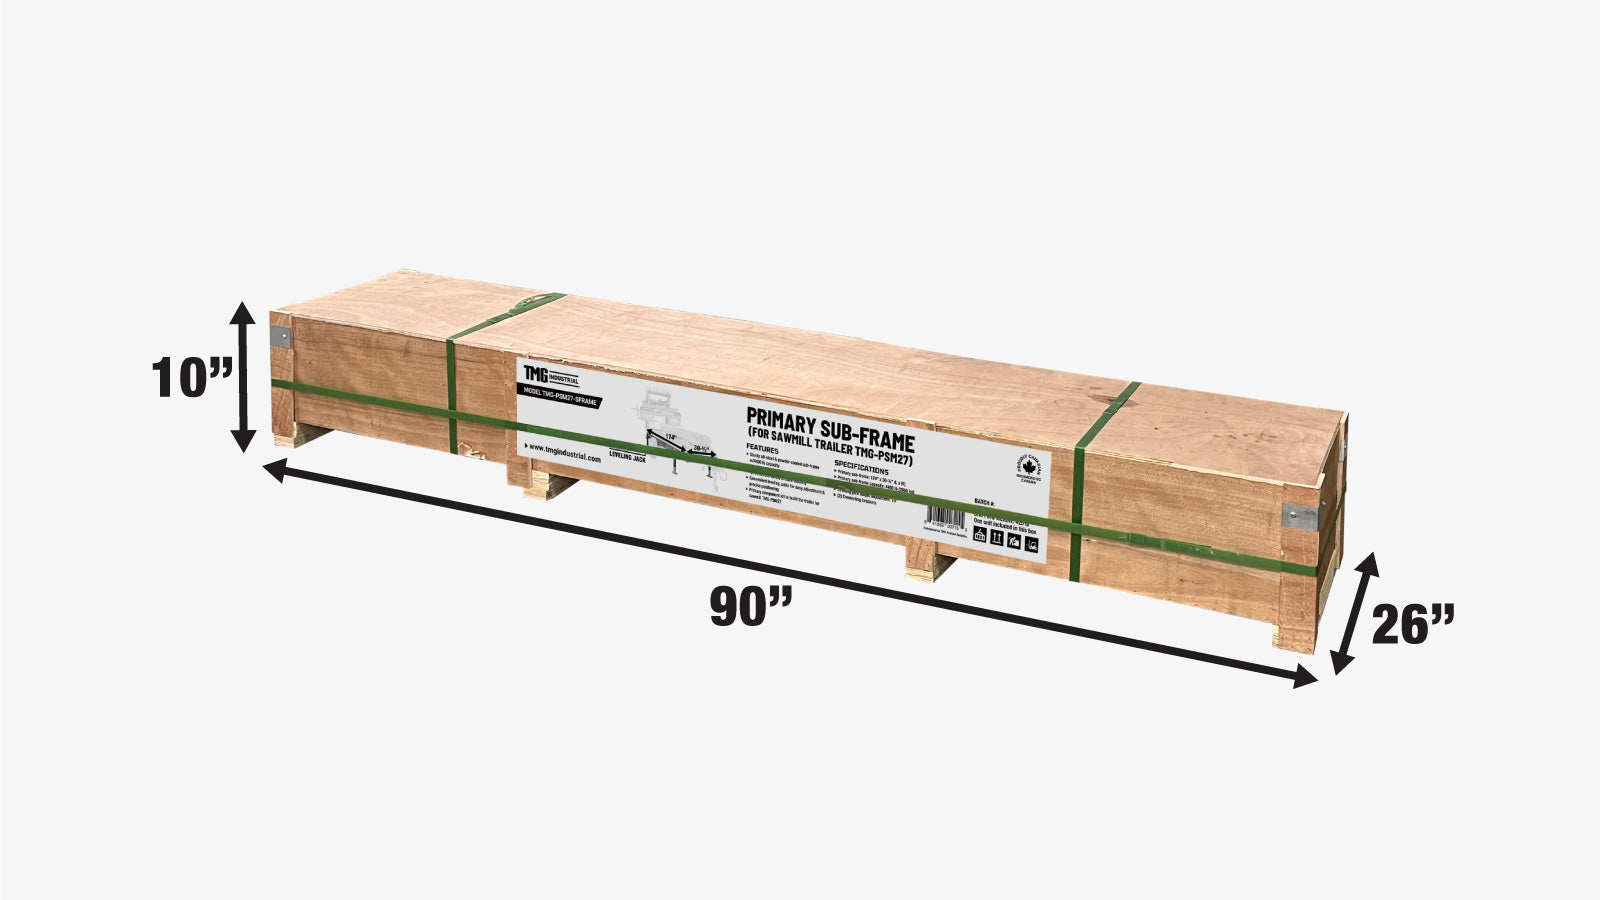 TMG Industrial Primary Sub-Frame for Sawmill Trailer PSM27, 4400-lb Capacity, Leveling Jacks, Anti-Tipping Rail Guard, TMG-PSM27-Sframe-shipping-info-image